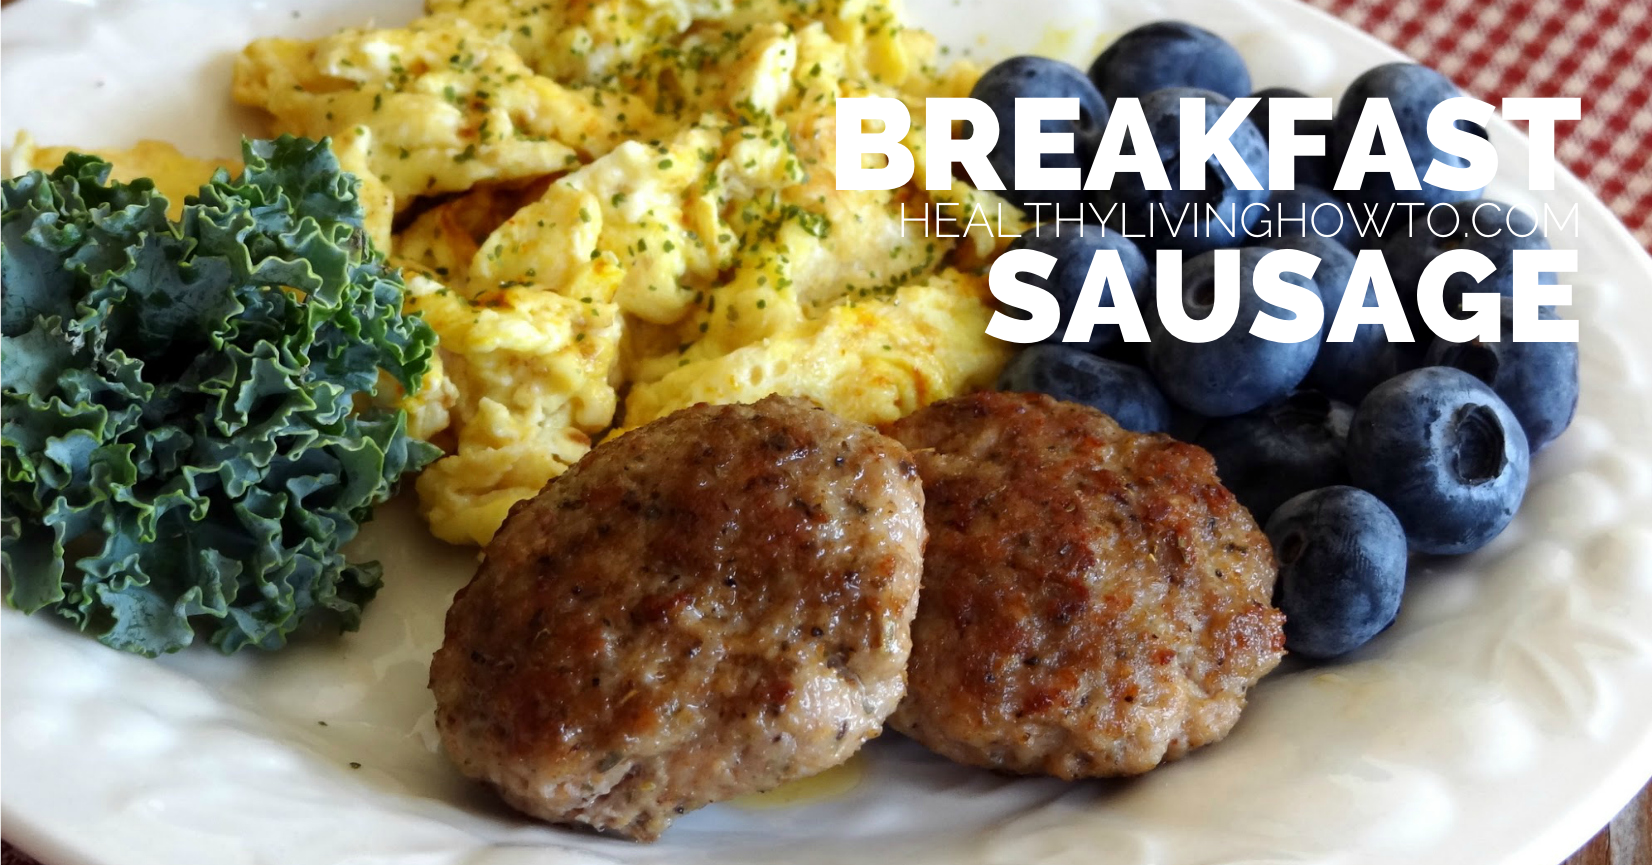 Breakfast Sausage | healthylivinghowto.com